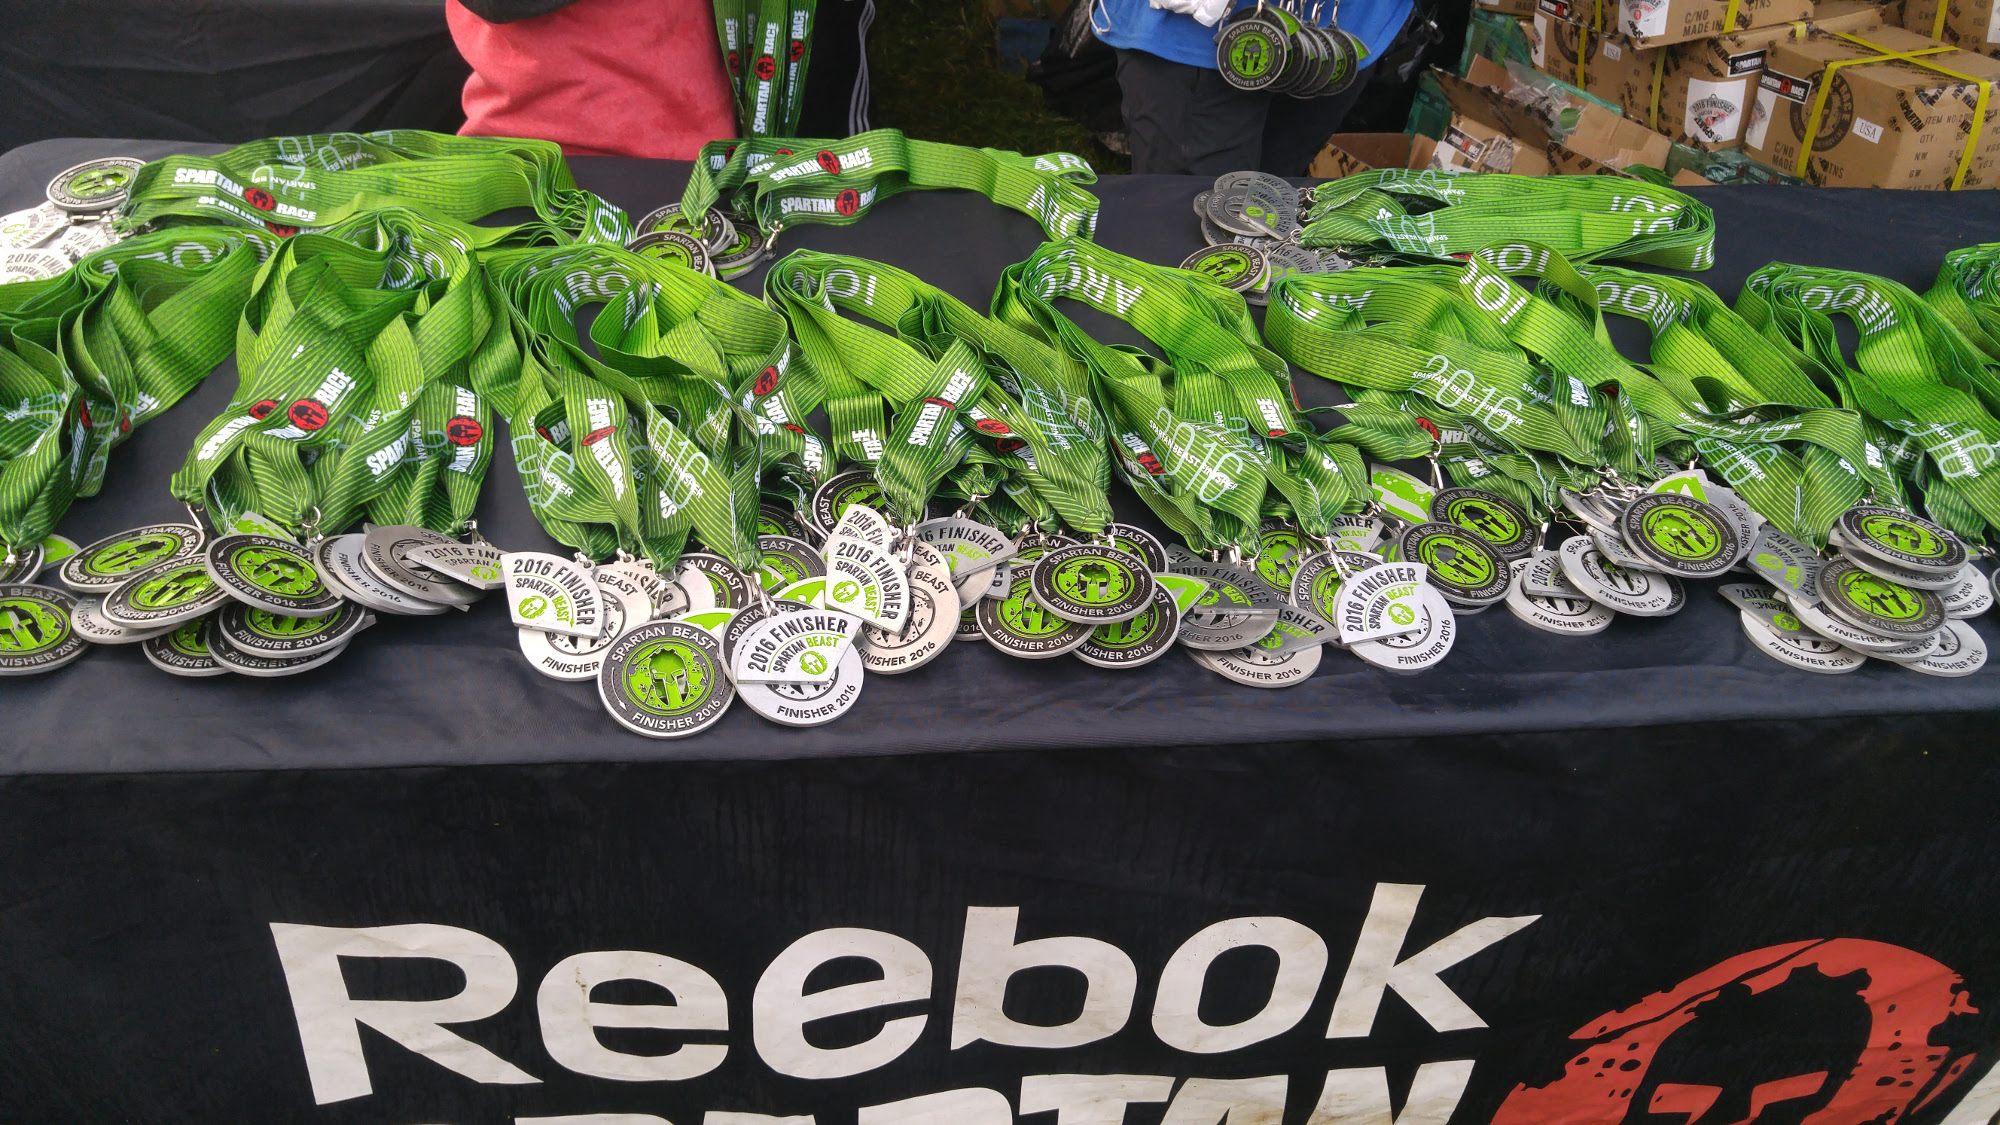 the beast finish line medals